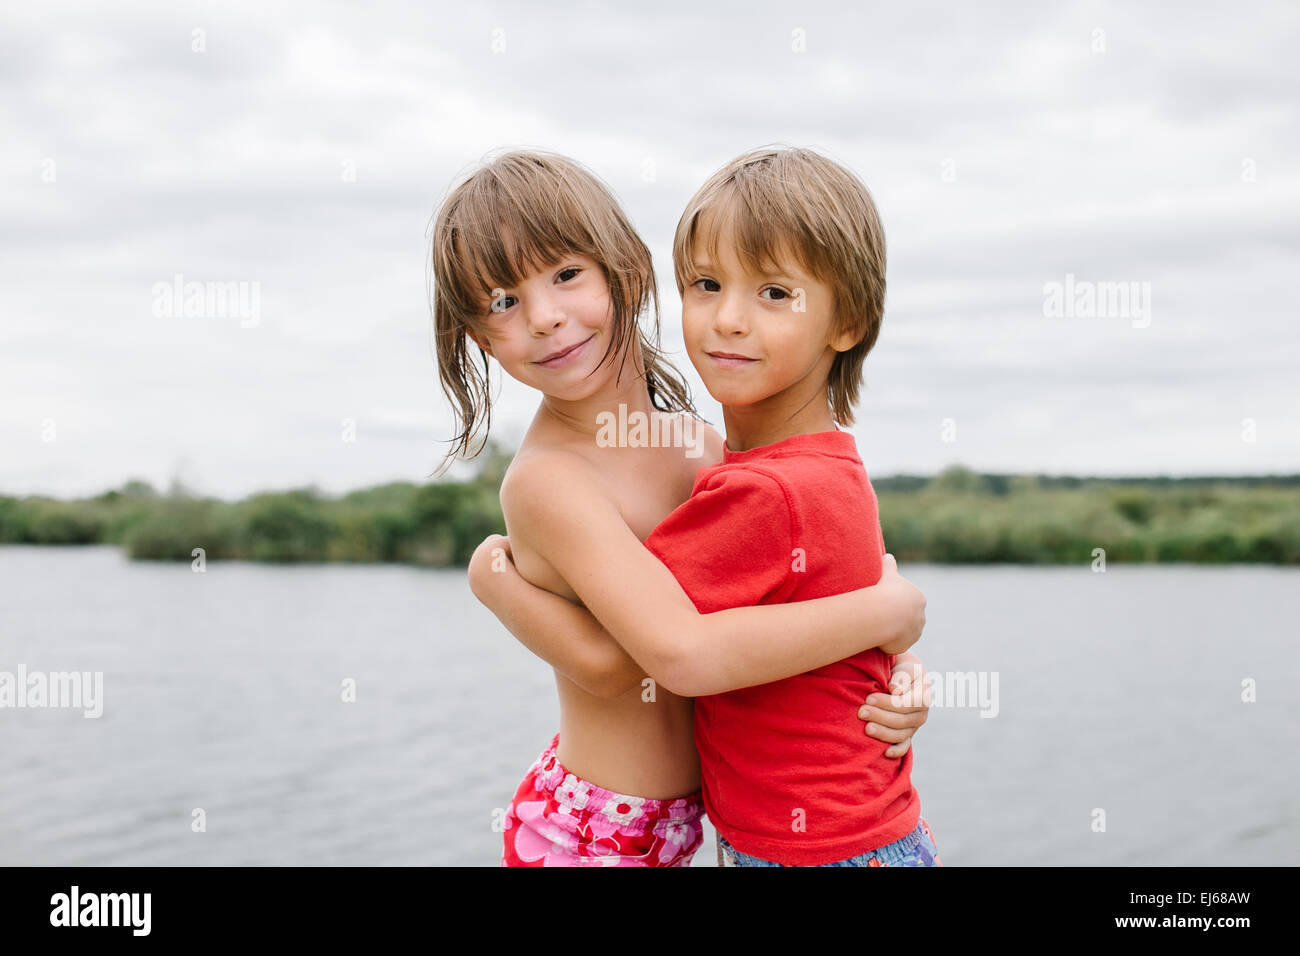 Cute Happy Fraternal Twins Enjoying Their Time At The Beach Brother And Sister Hugging Having